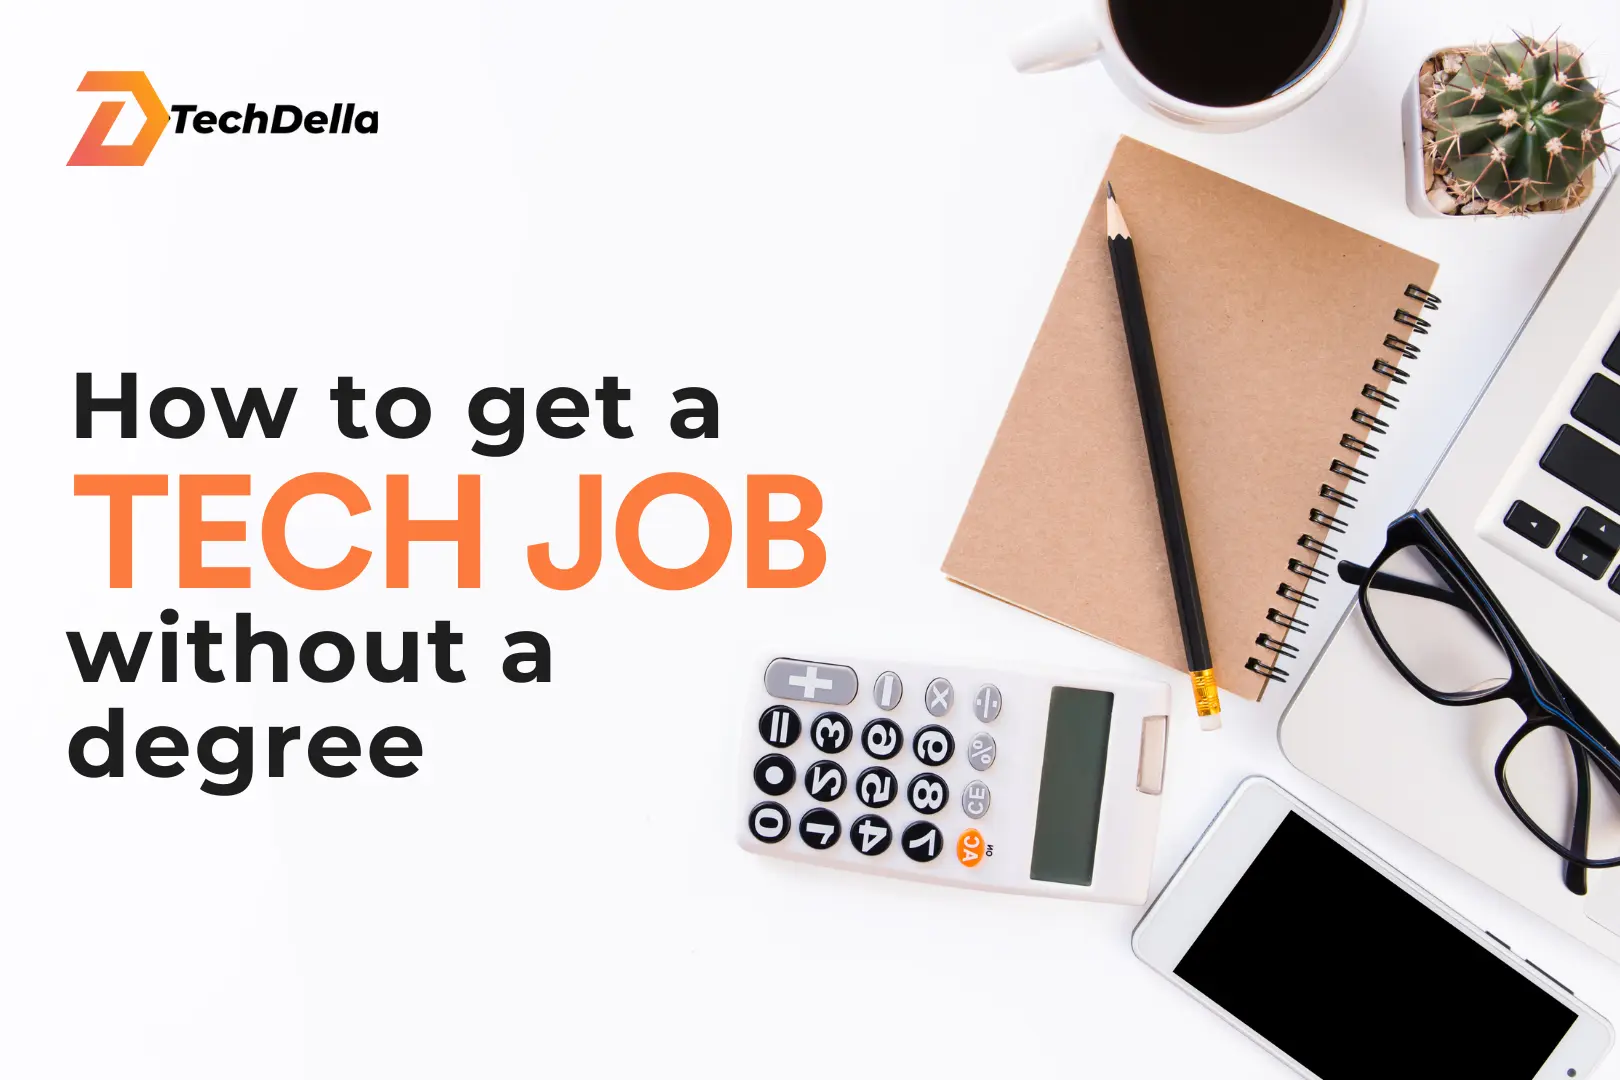 How to Get a Tech Job Without a Degree